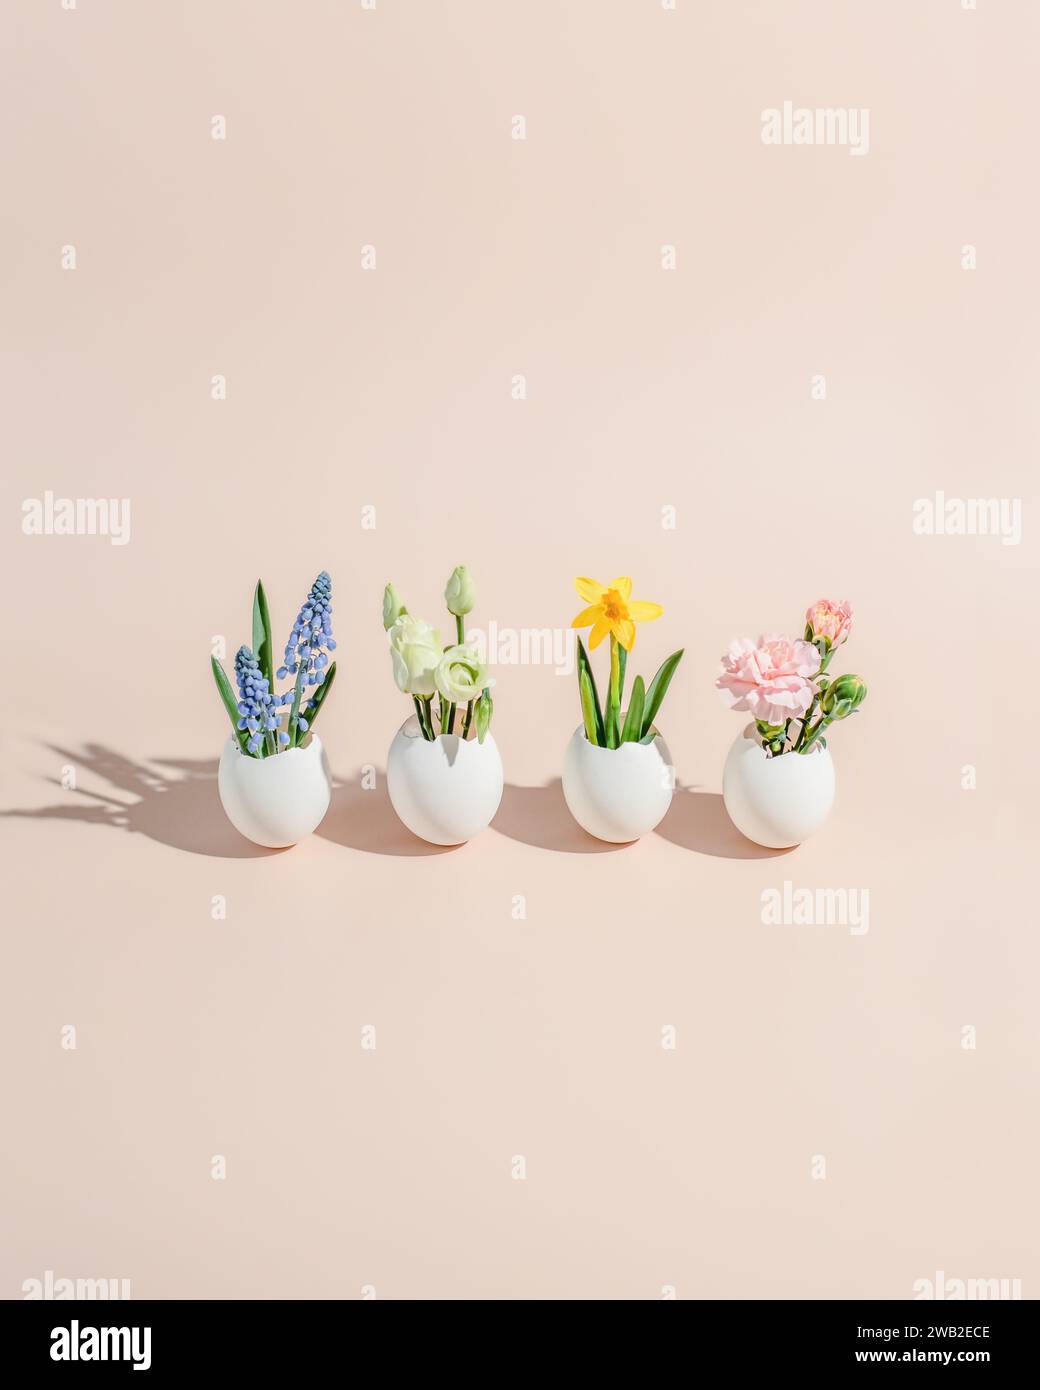 Spring first flowers growth from eggshells. creative minimal concept. Stock Photo